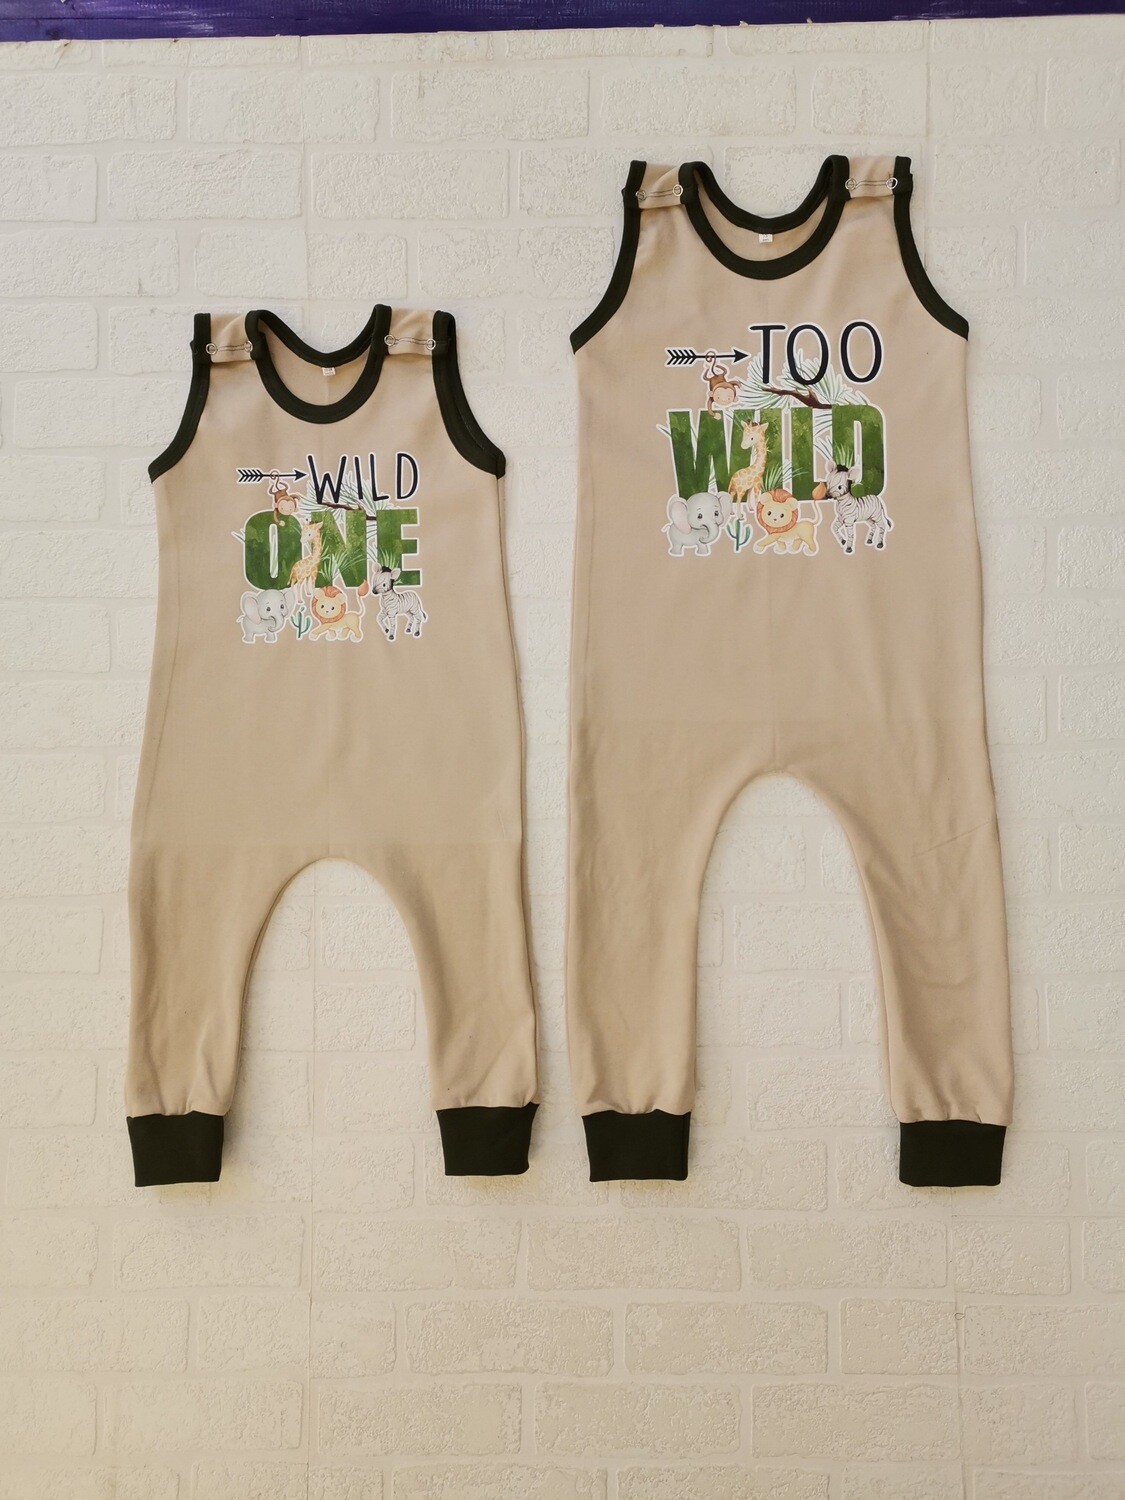 Toddler Rompers